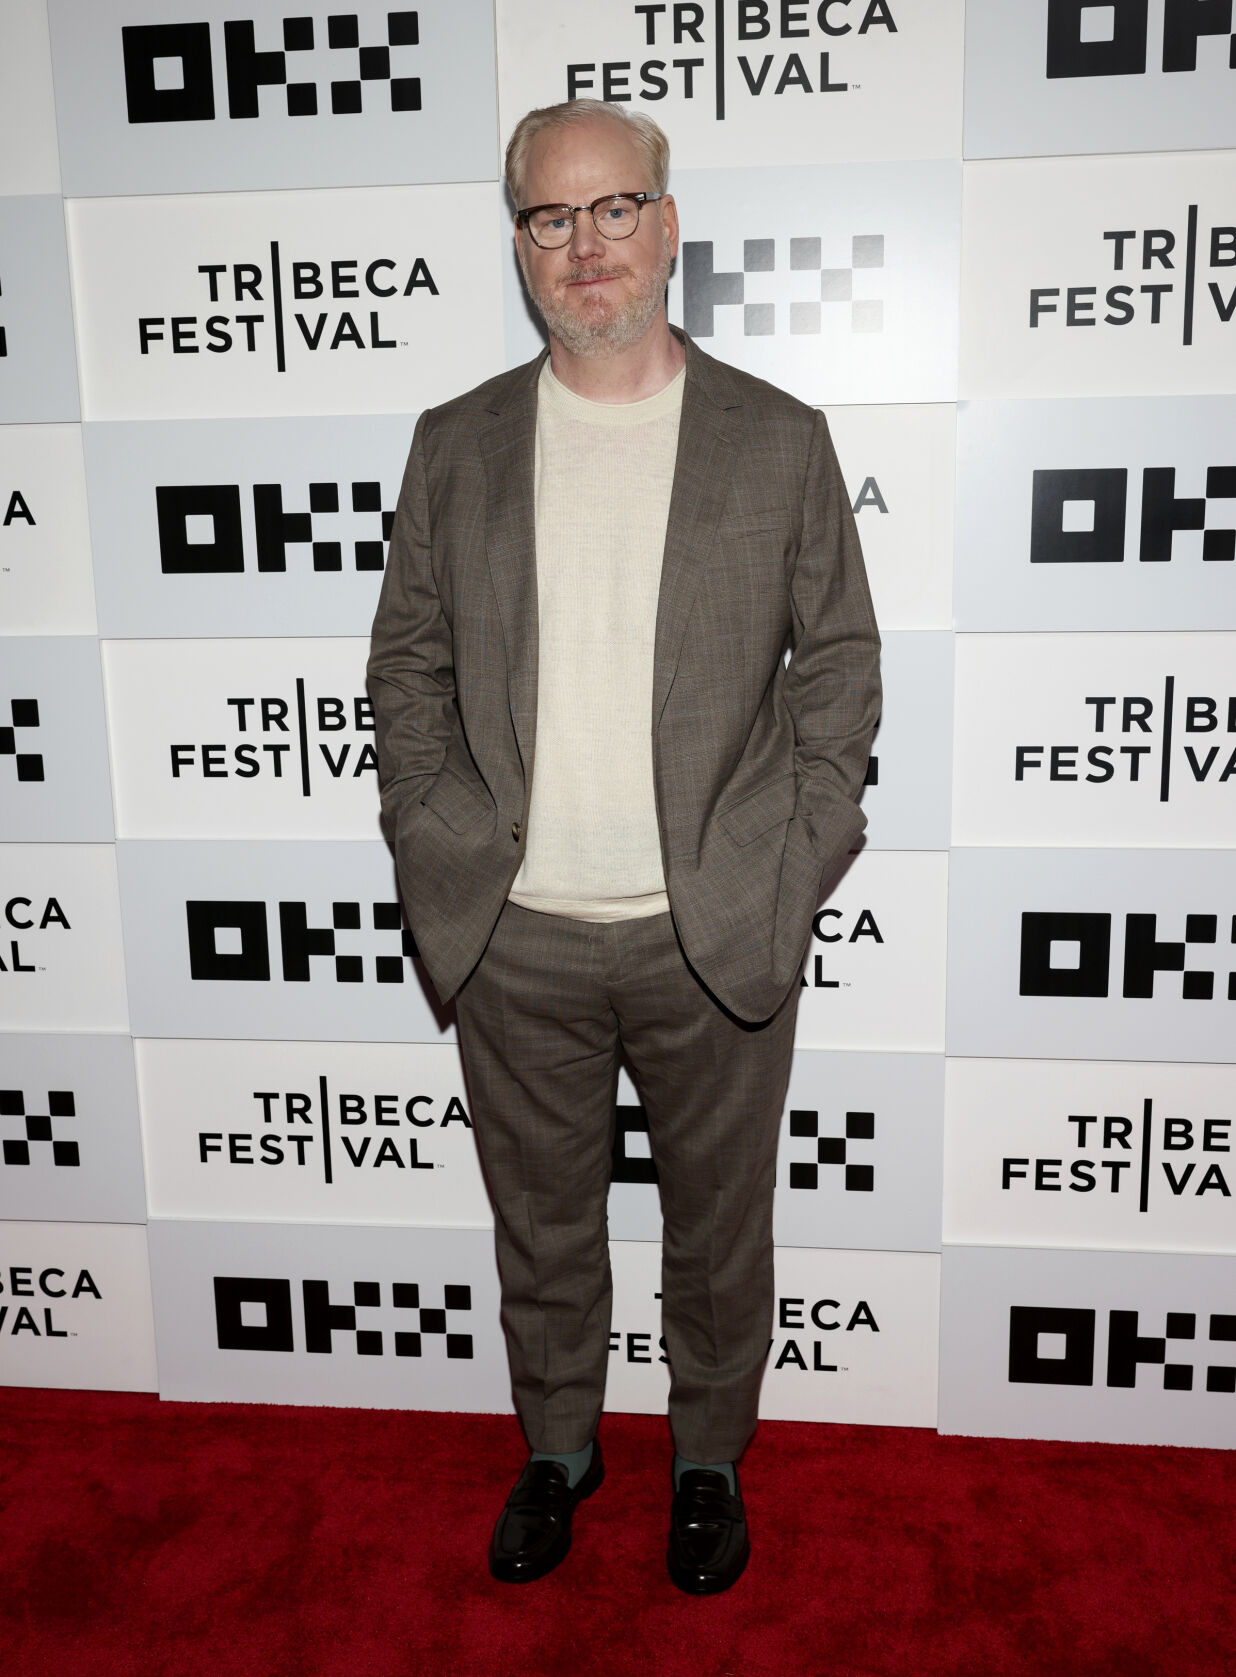 Jim Gaffigan attends the premiere of "Full Circle" at OKX Theater BMCC Tribeca Performing Arts Center during the Tribeca Festival on Sunday, June 11, 2023, in New York.